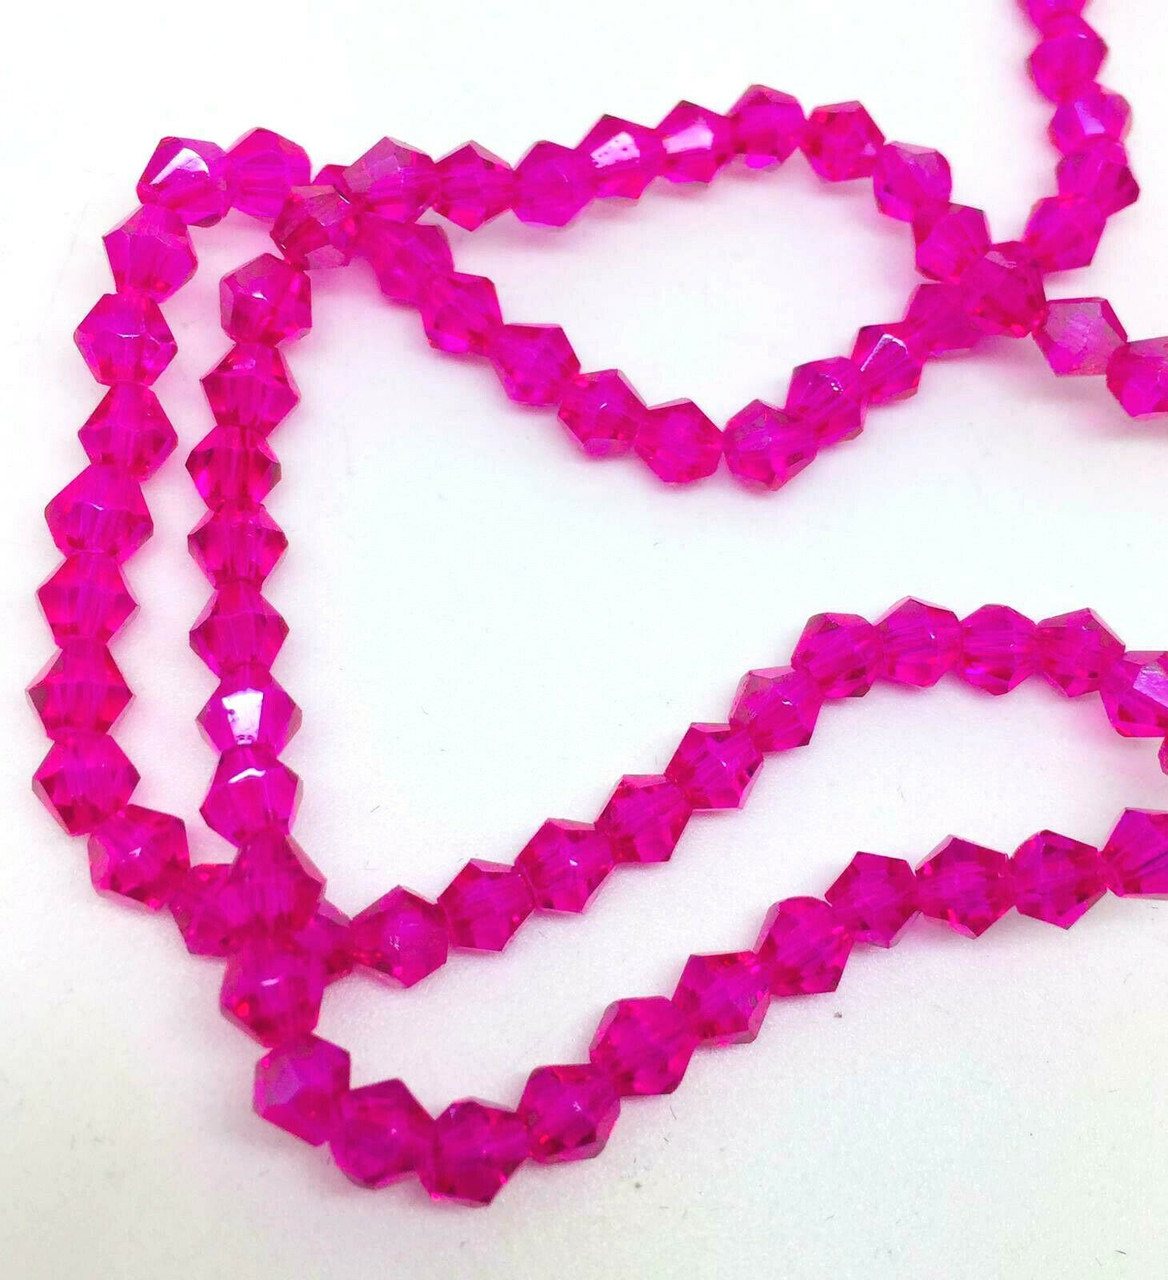 4mm Glass Bicone beads - HOT PINK AB - approx 16" strand (115-120 beads)